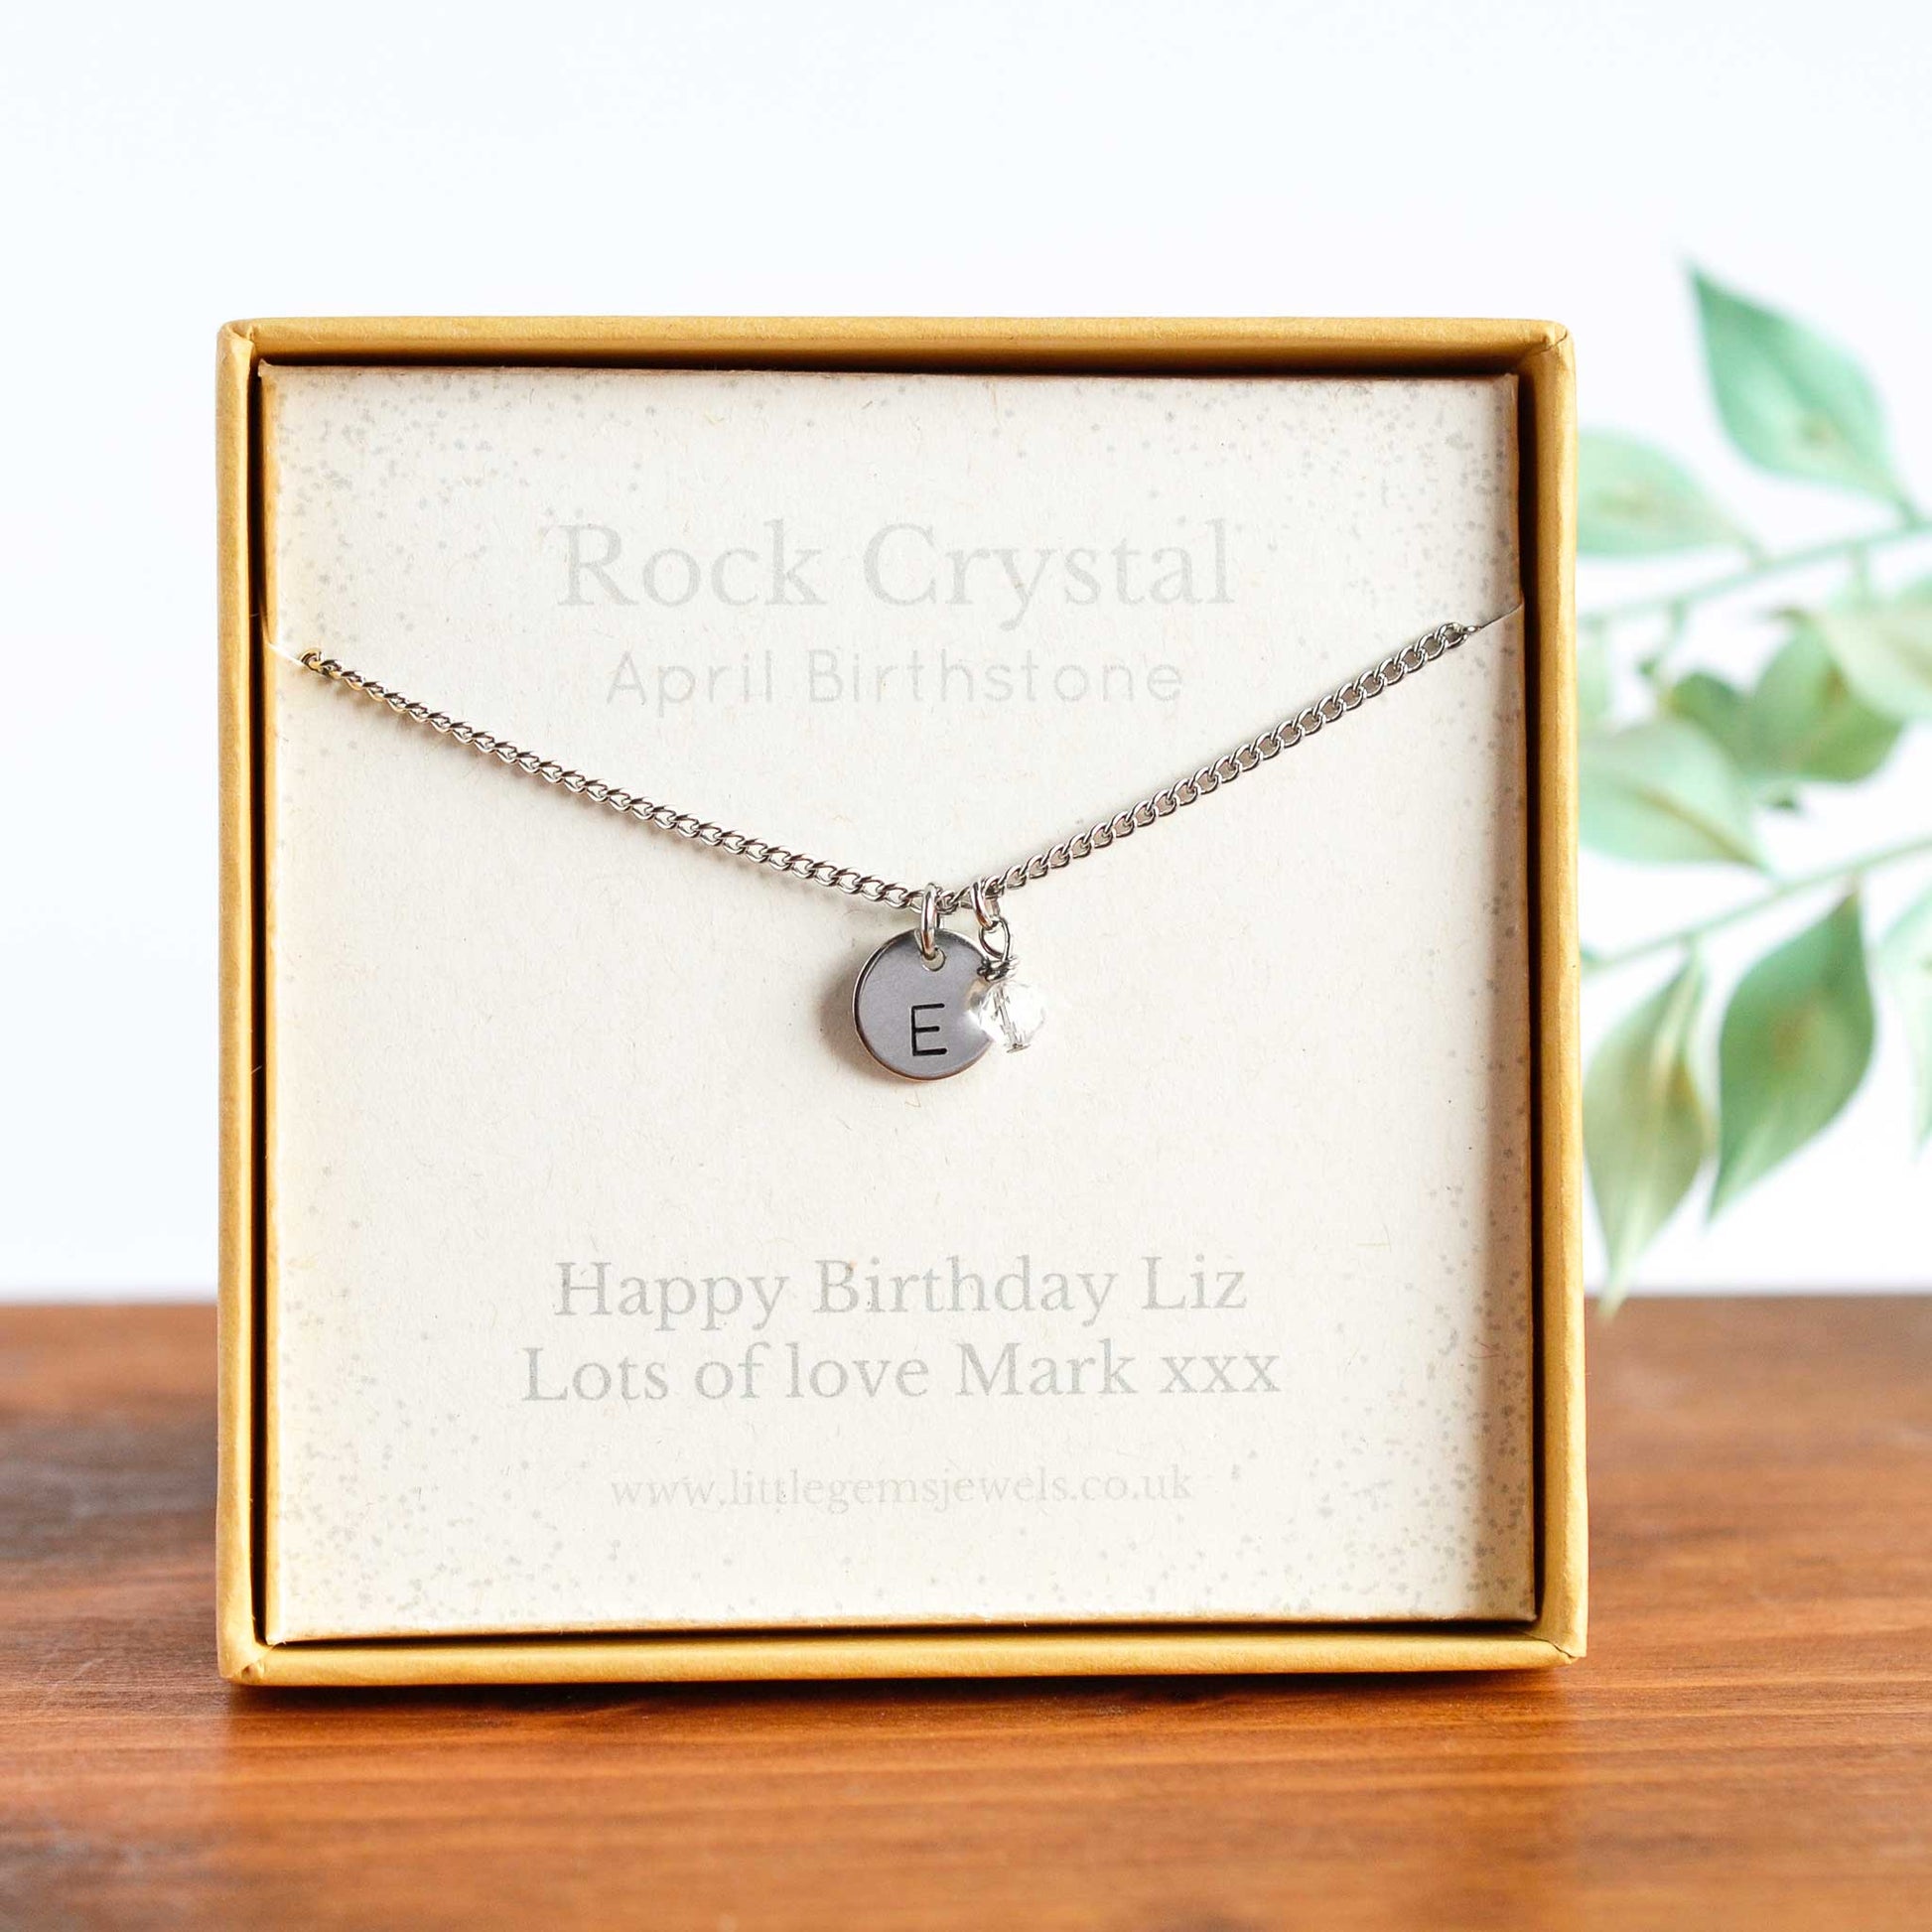 April Birthstone necklace with initial charm & personalised gift message in eco friendly gift box